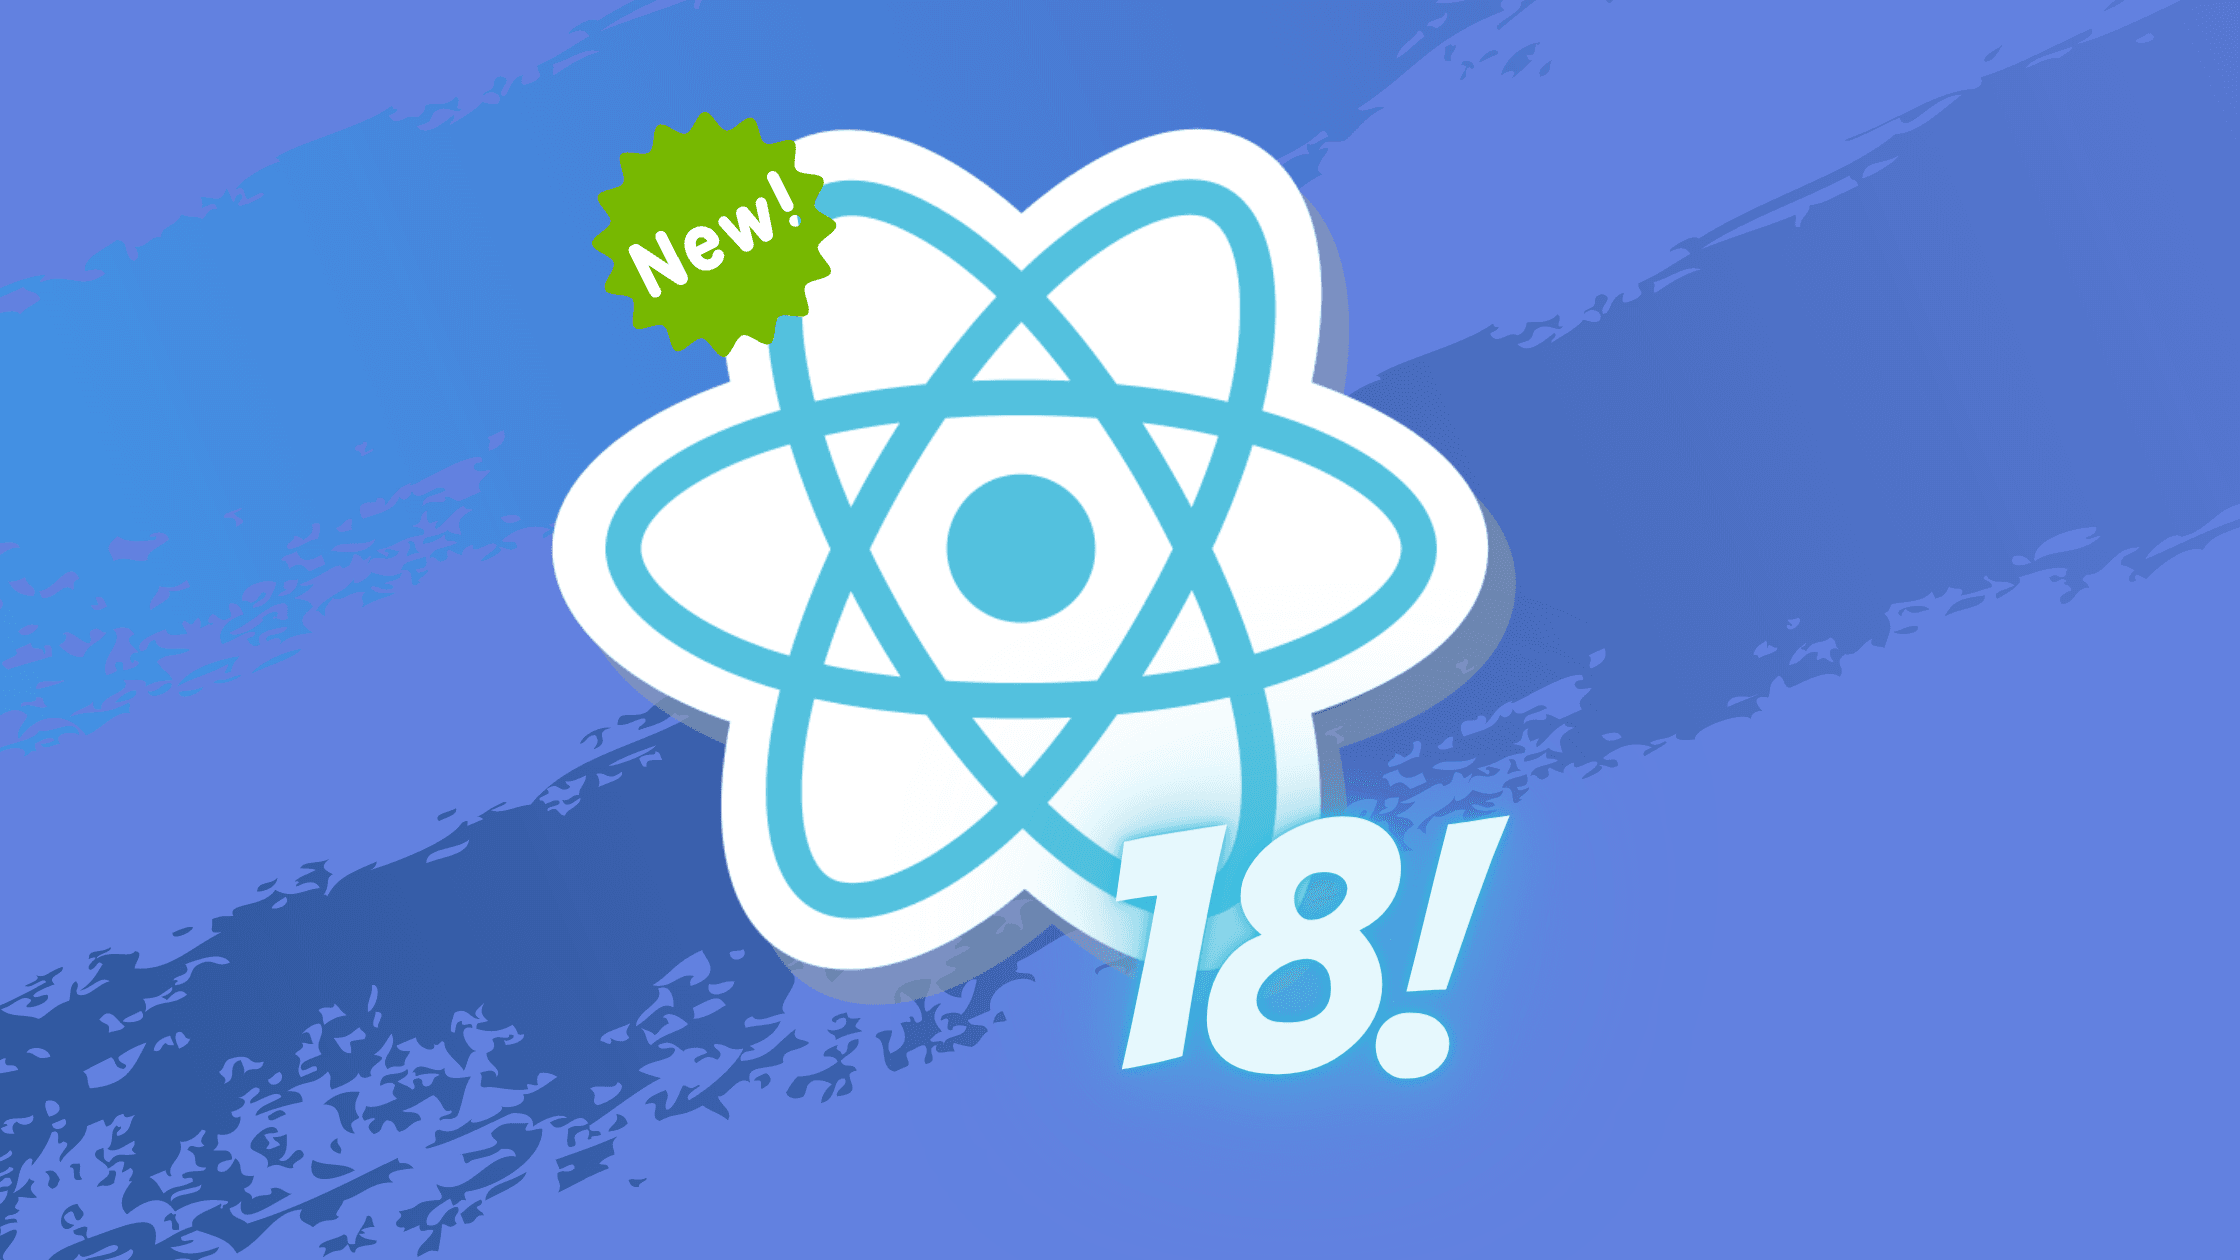 React 18-Alpha Is Out! This Is What You Need to Know